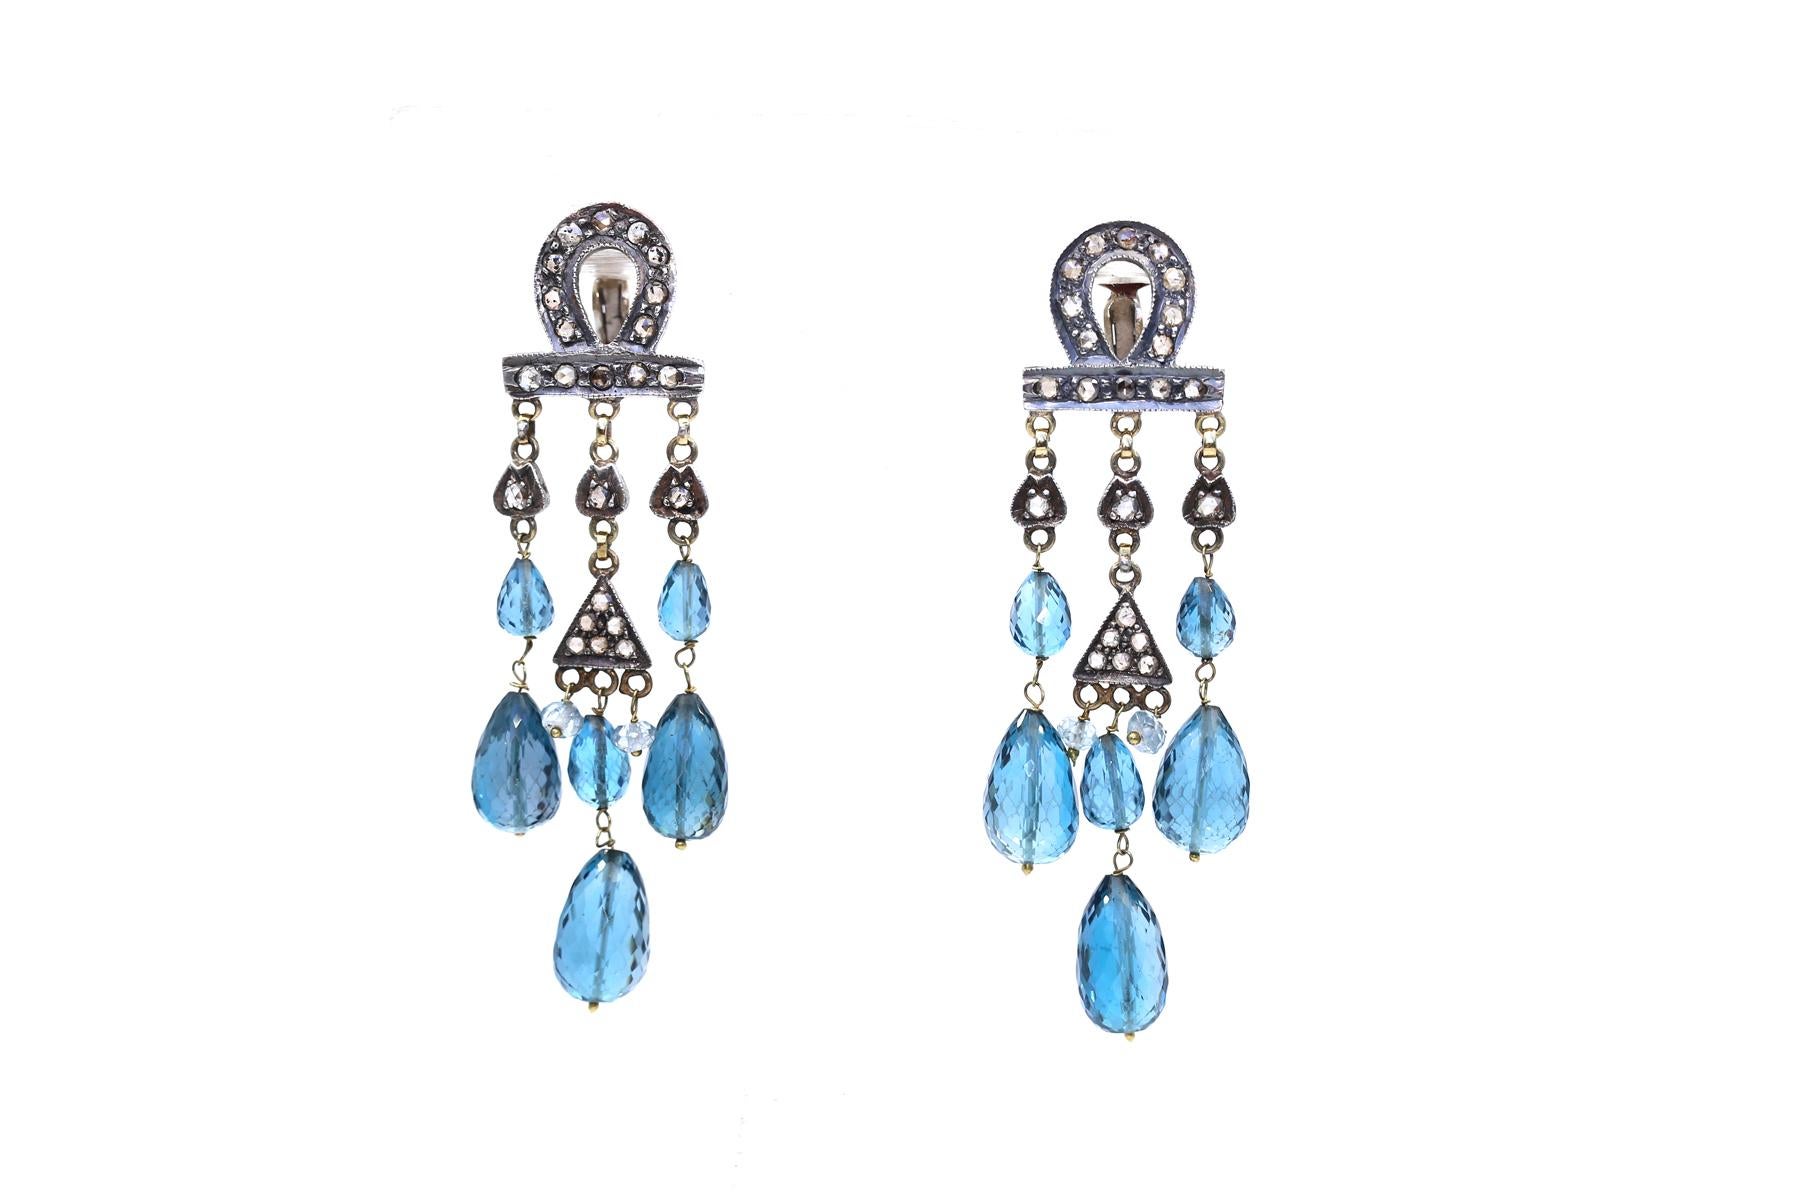 Aquamarine Gold Silver Diamonds Chandelier Earrings. Aquamarine Gold Silver Diamonds Chandelier Earrings. Chandelier Earrings with fine Aquamarine and Diamonds, cast in Silver and Gold.  The aquamarine shade and color is bright and vivid. All the